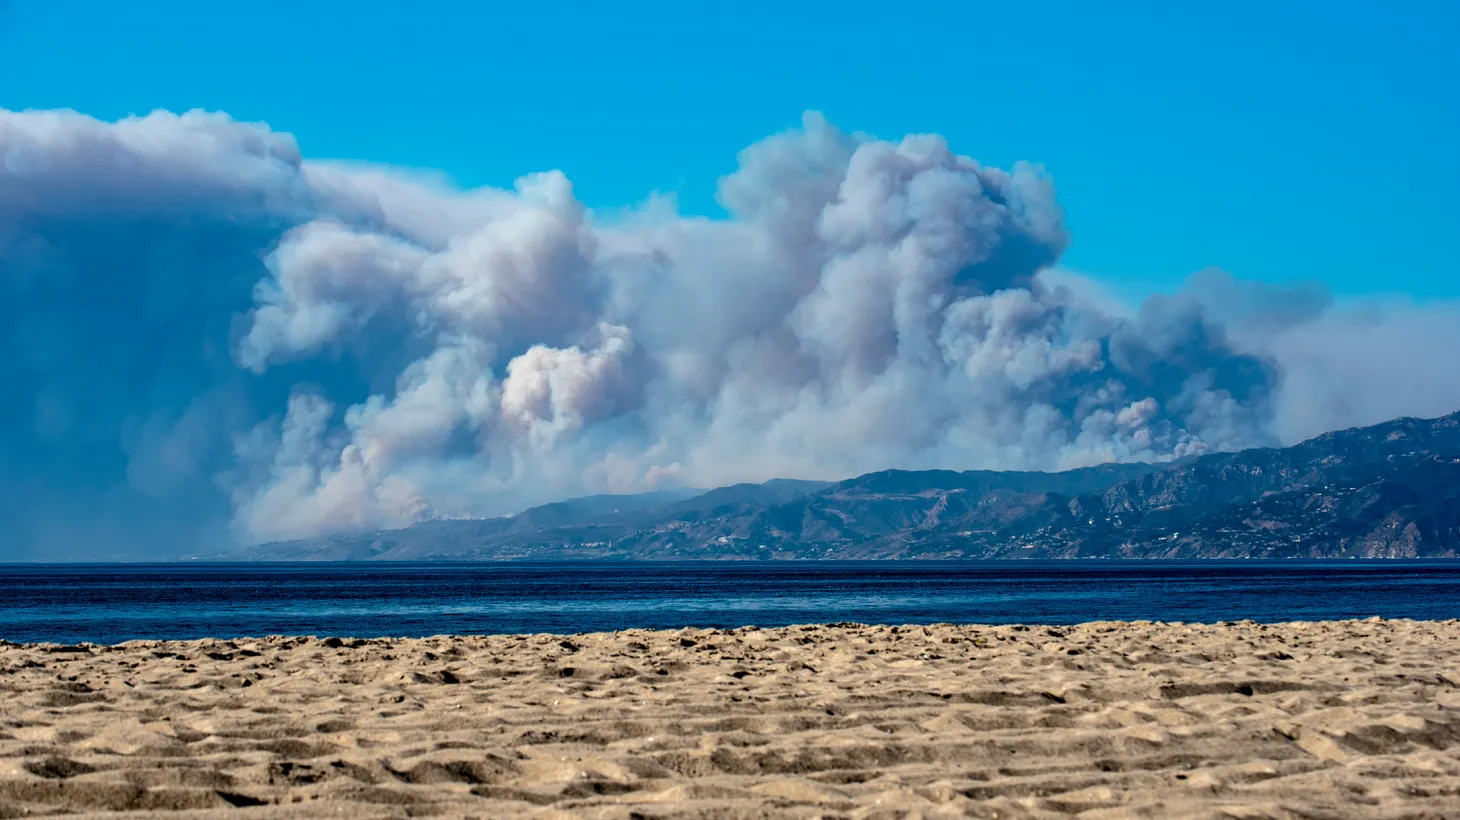 The Woolsey Fire burns in Malibu from the Pacific Ocean into the Santa Monica mountains. Forest fire creates massive clouds of smoke. November 9, 2018. Los Angeles, CA.